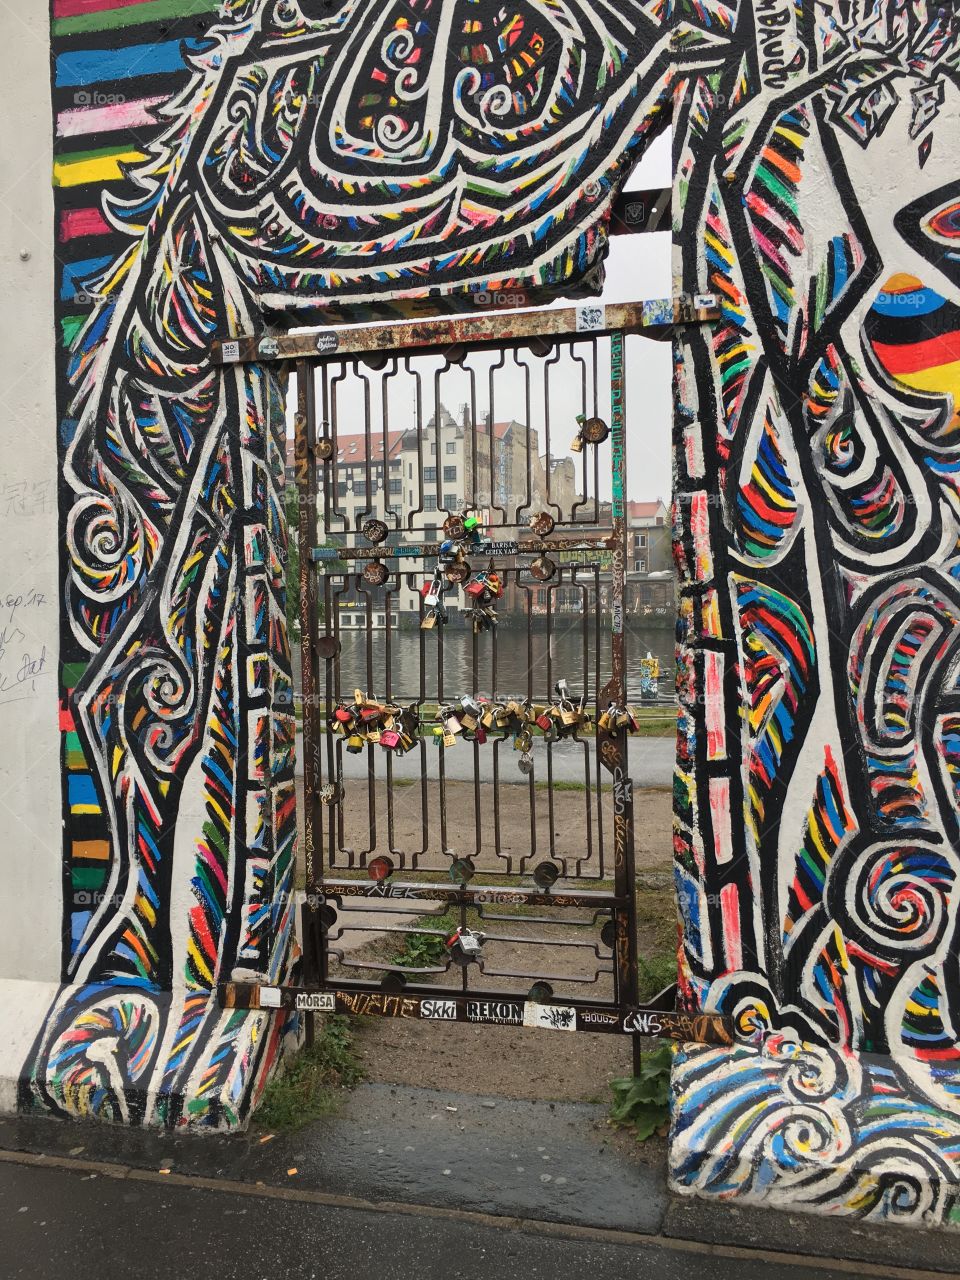 Locks attached to a wrought iron door in a remaining section of the Berlin Wall. 